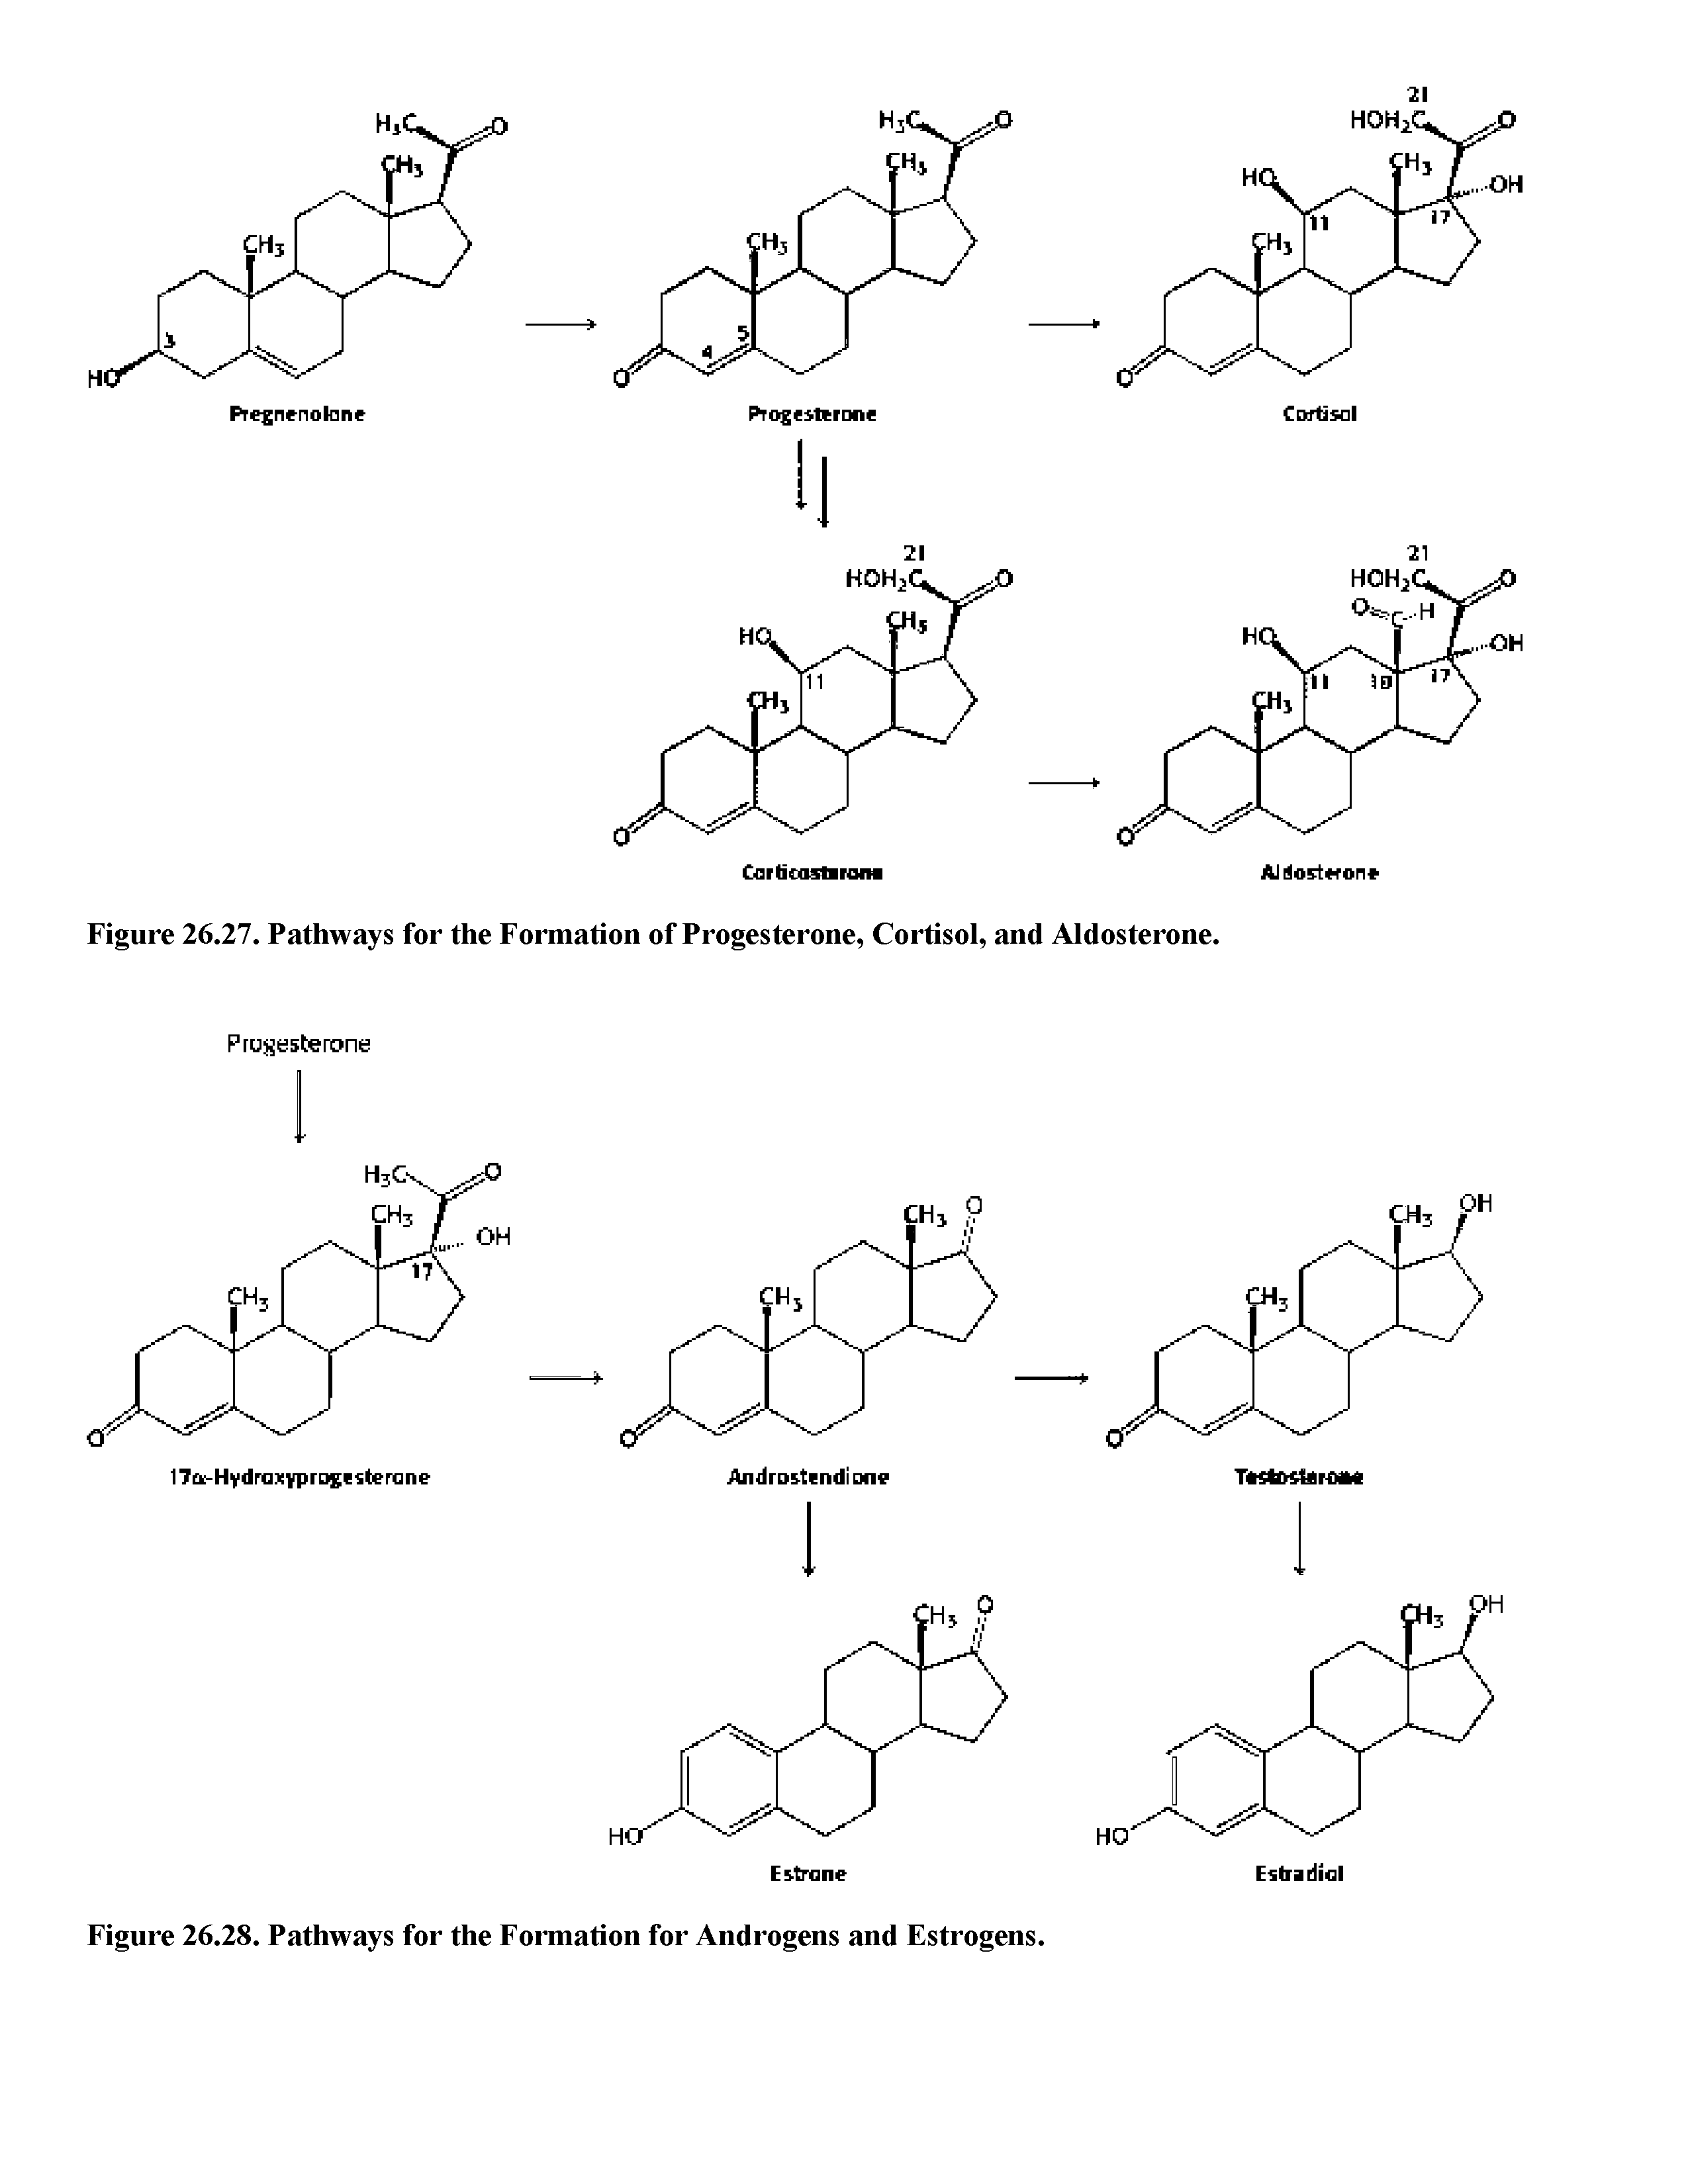 Figure 26.27. Pathways for the Formation of Progesterone, Cortisol, and Aldosterone.